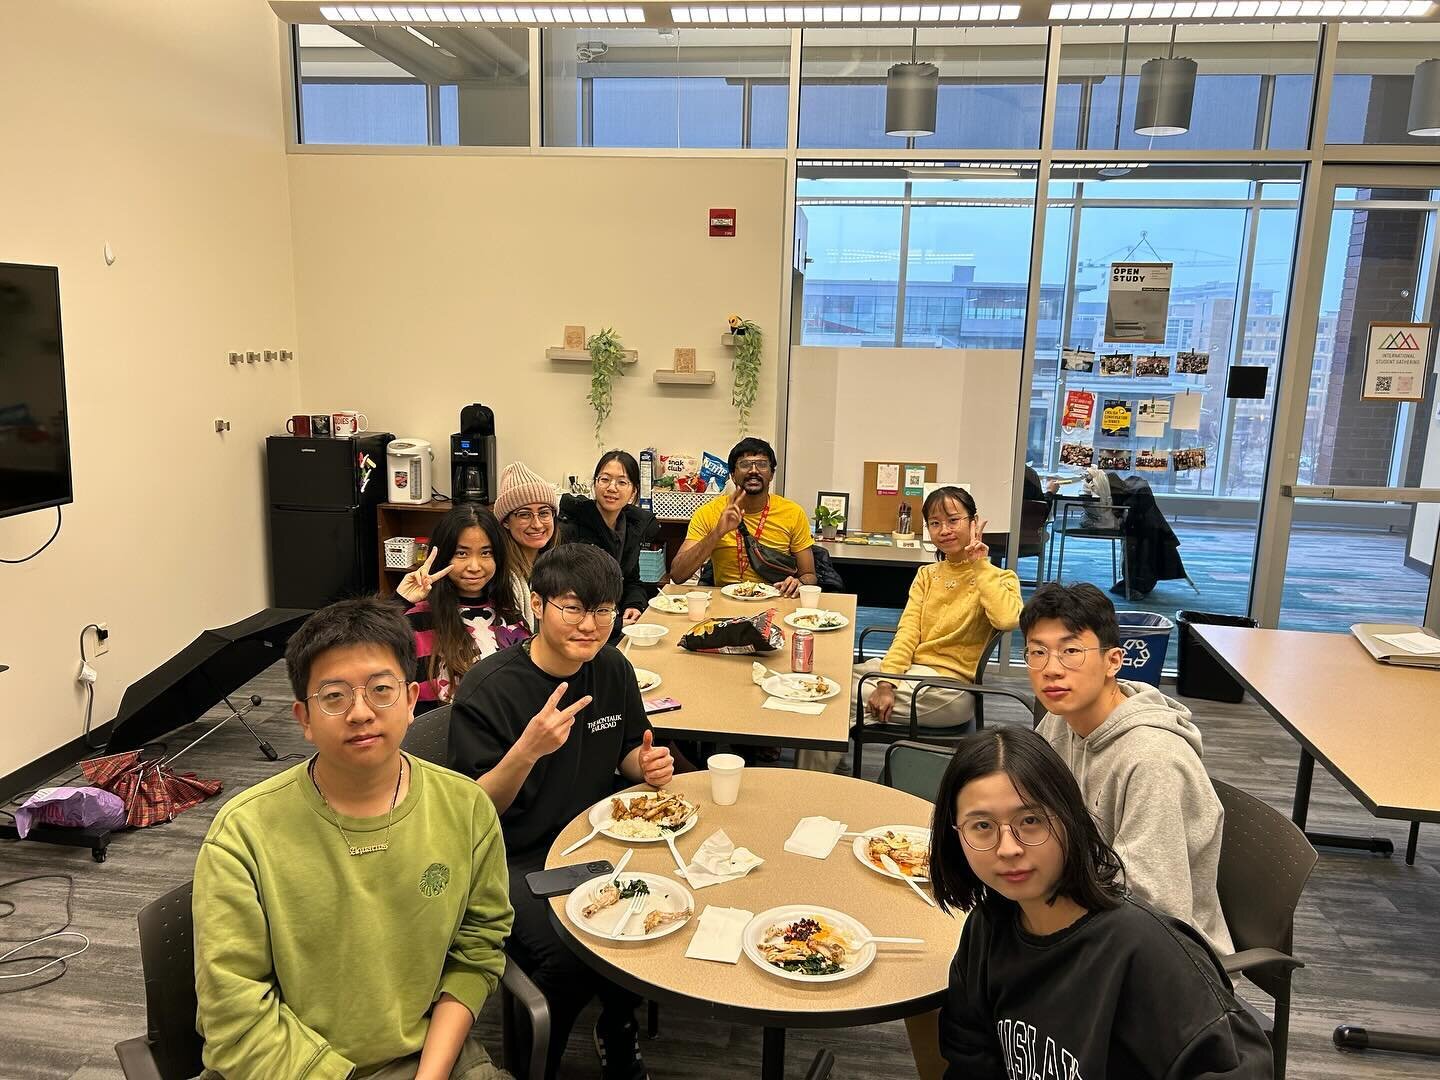 📸 HOTspot today (Tue, 4/2)! Good to see you all and catch up with you all over lunch! We&rsquo;ll be back next week~ #isg_madison #hotspot #lunch #tuesday #uwmadison #uwmadisonstudents #uwmadisoninternationalstudents